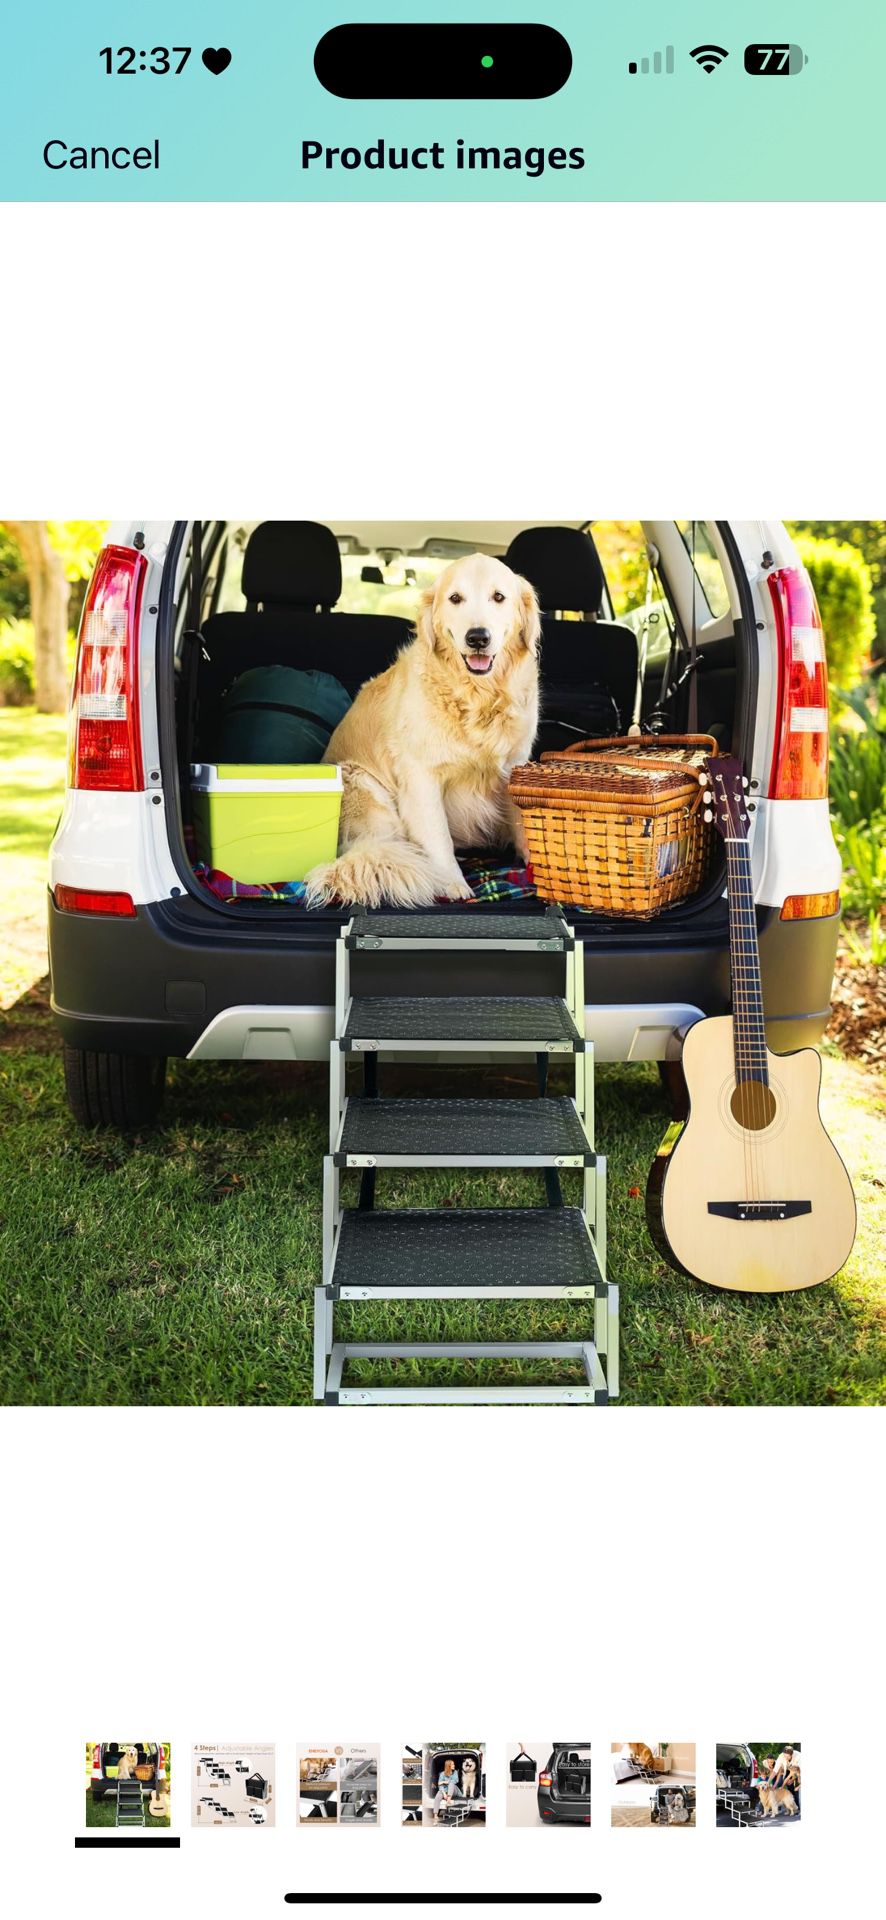 EHEYCIGA Foldable Dog Car Ramp for Large Dogs, Portable Dog Steps for SUV, Aluminum Dog Stairs with Non-Slip Surface for High Beds, Trucks and SUVs, 4